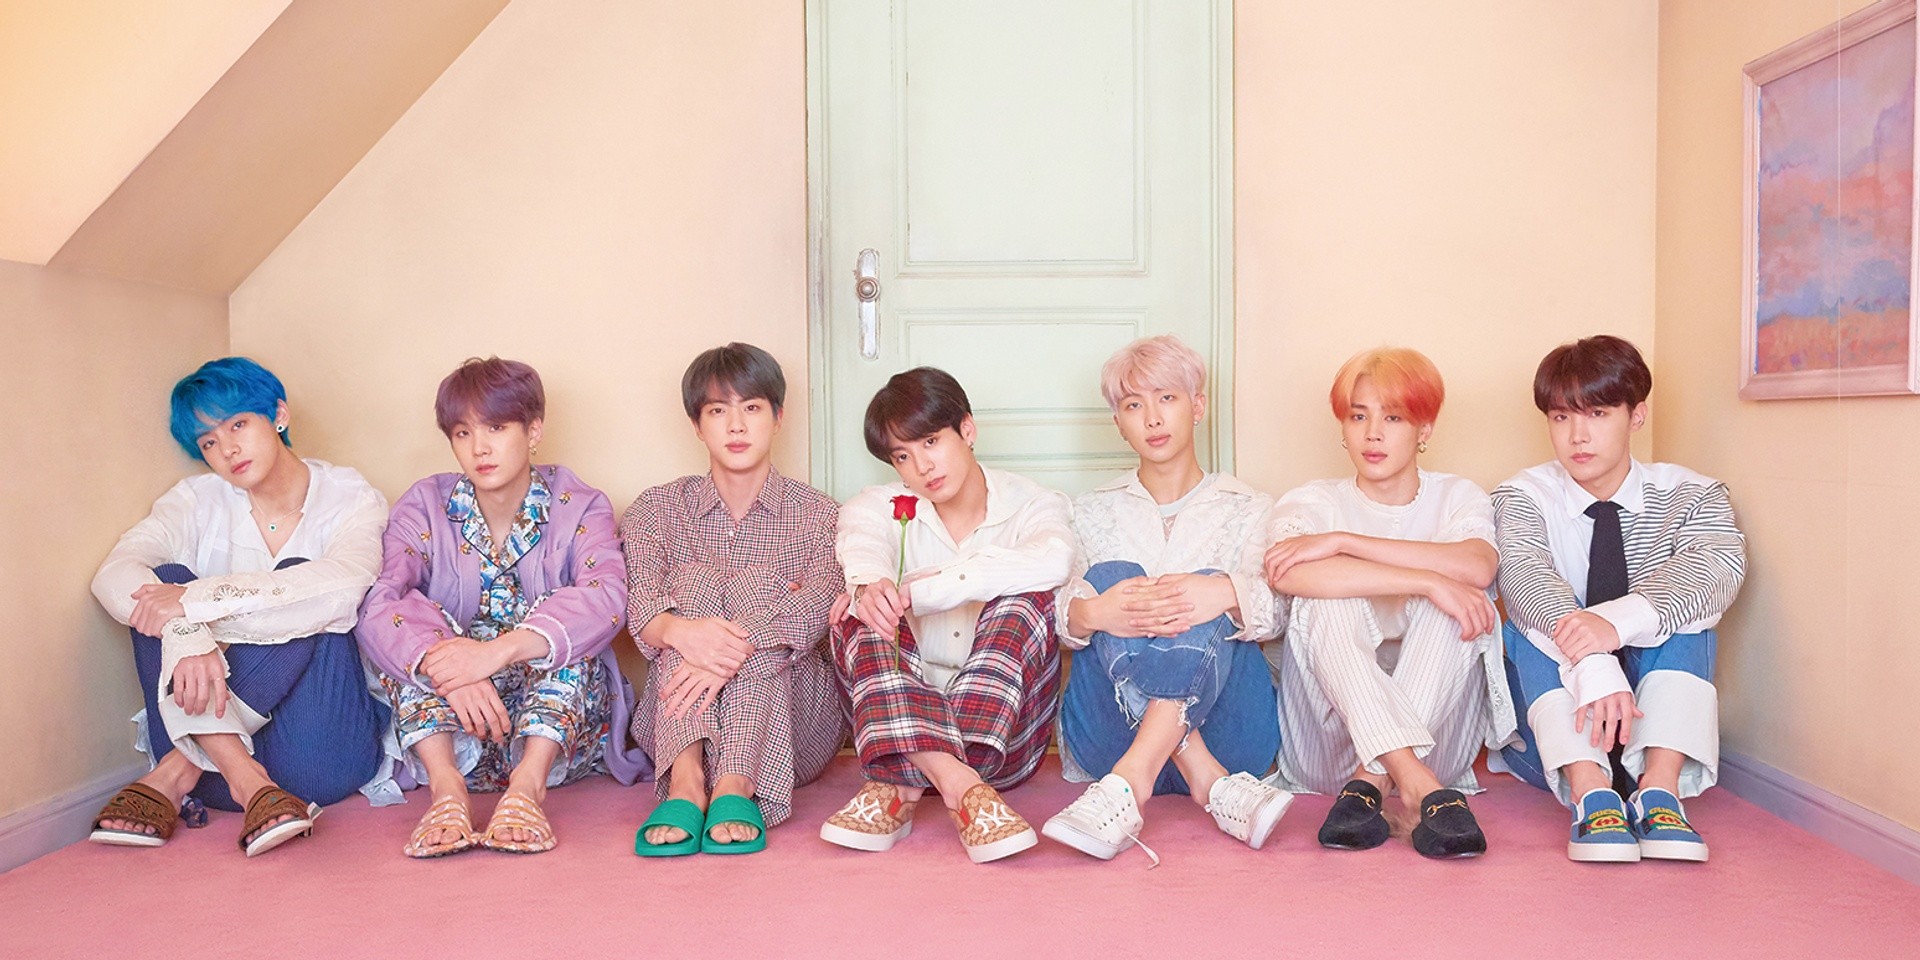 BTS releases new track, 'A Brand New Day' featuring Zara Larsson and Mura Masa – listen 